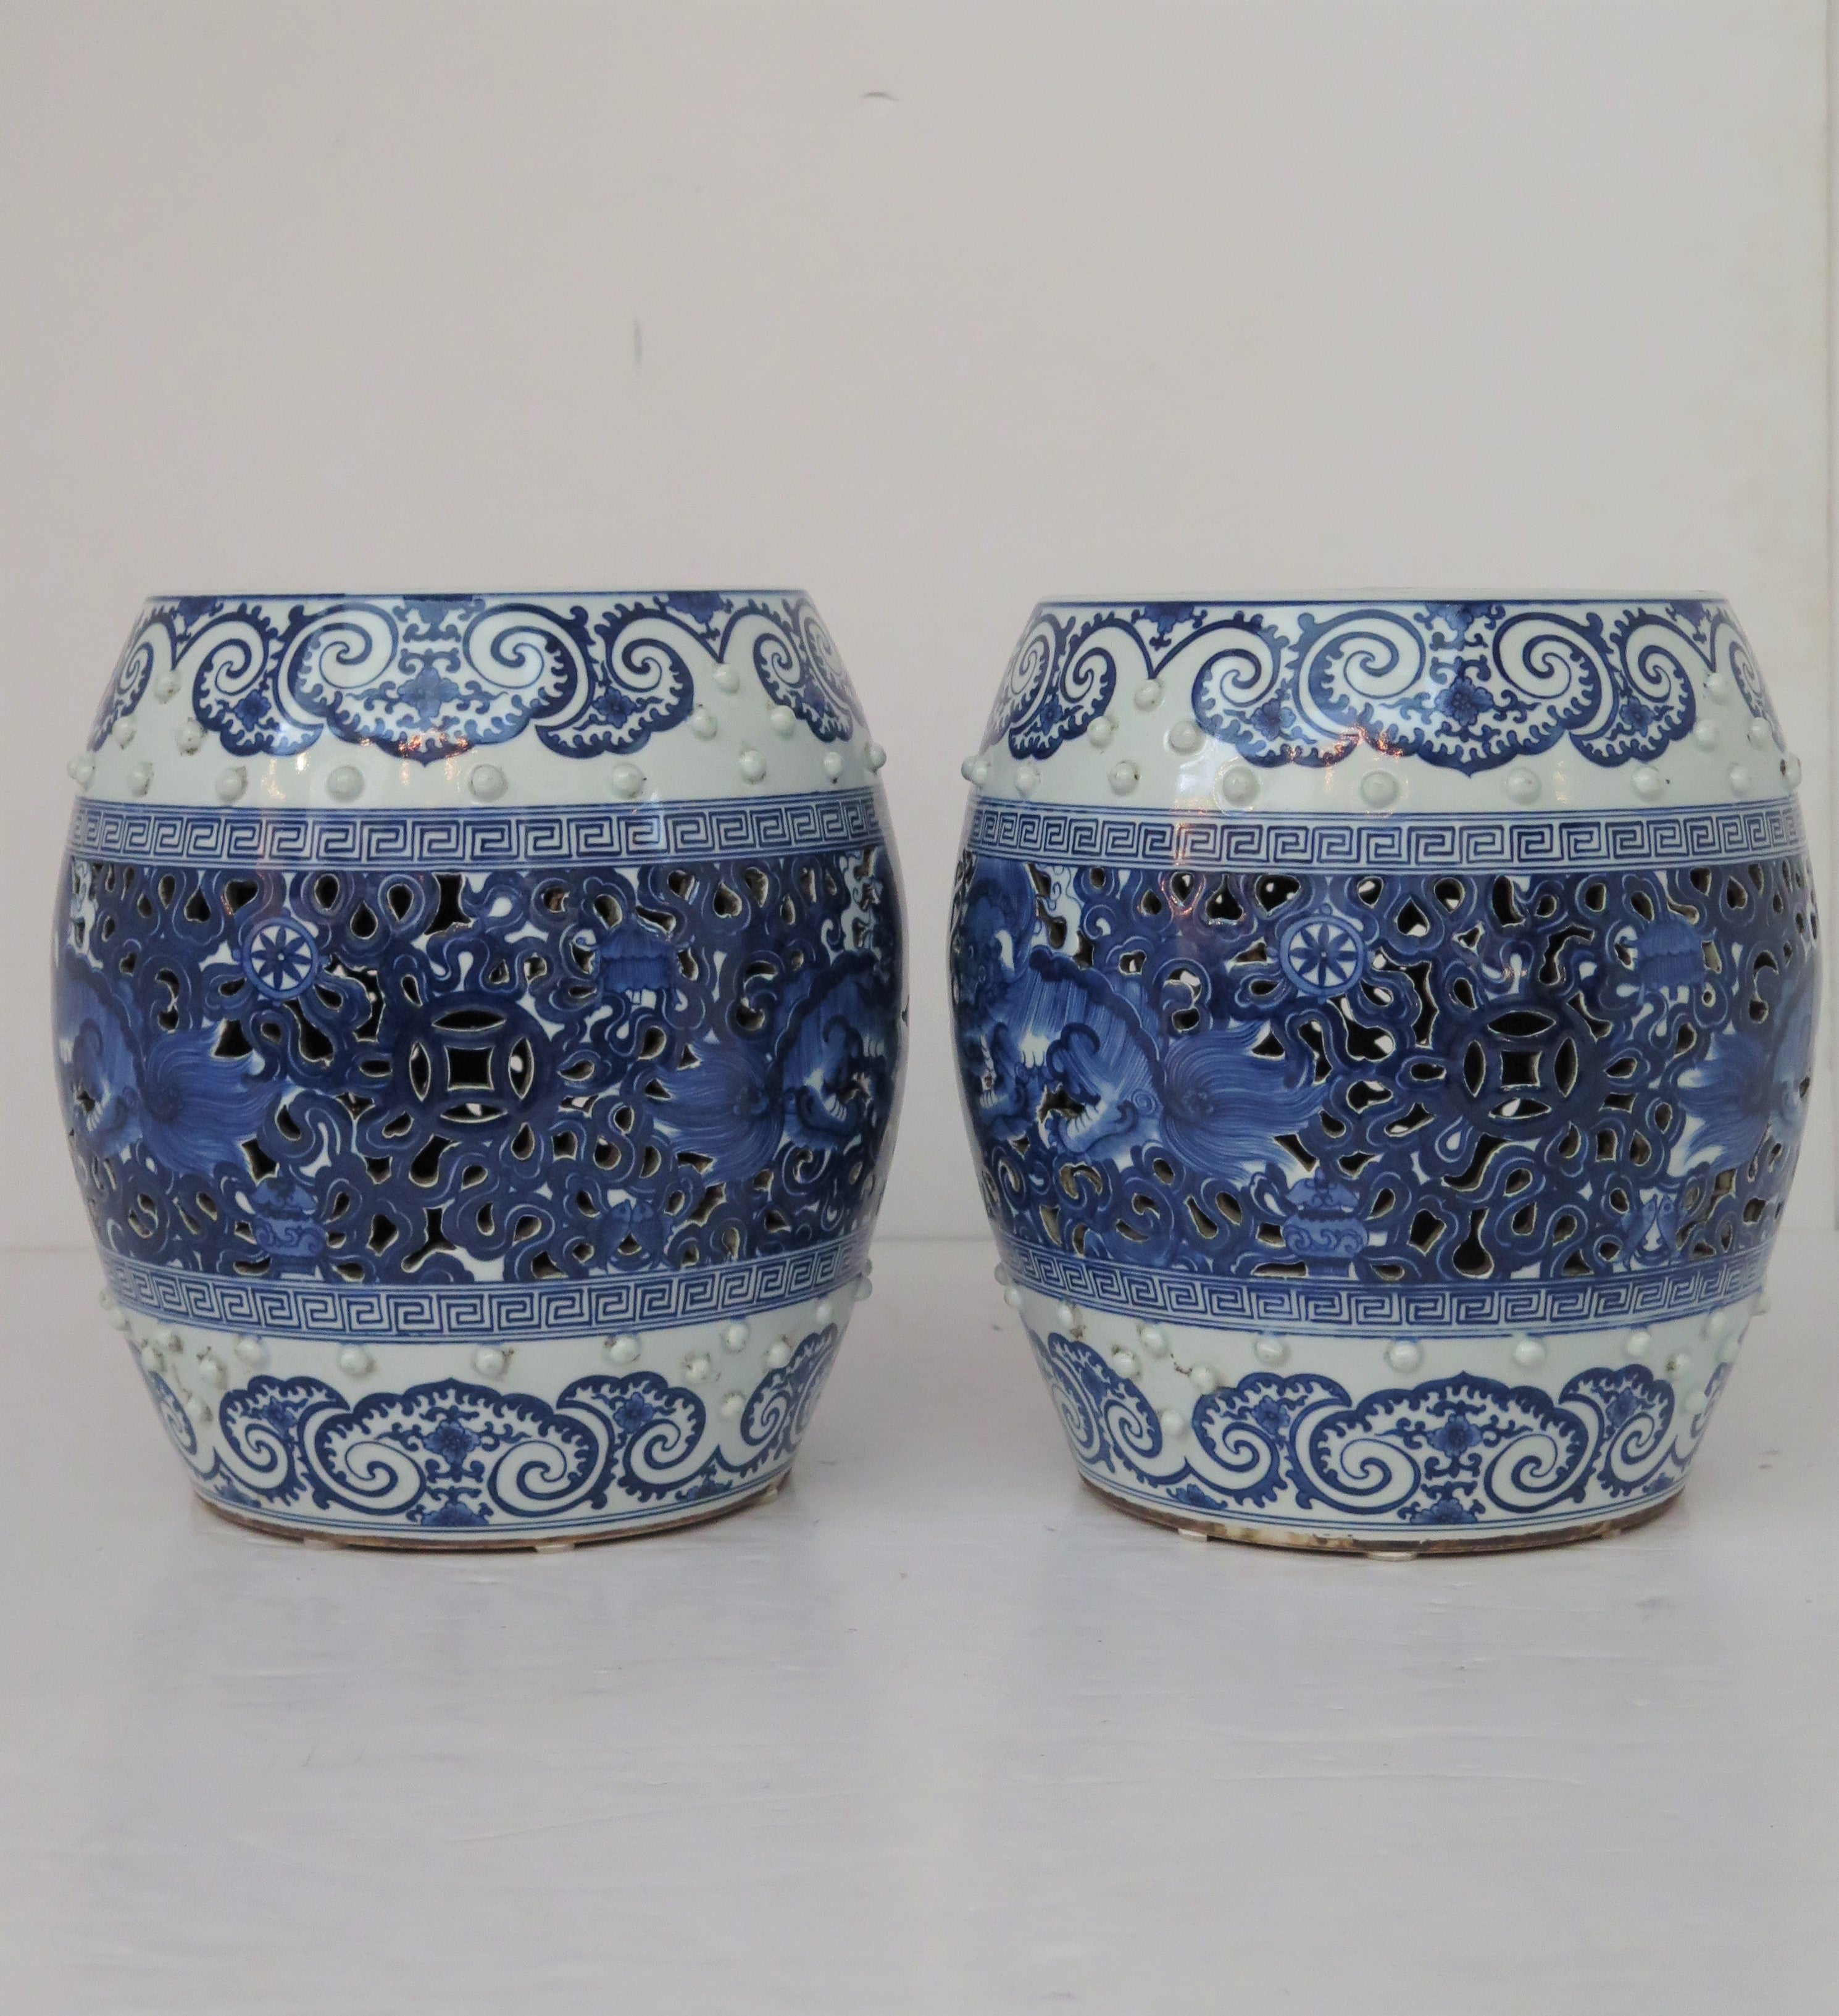 Pair of Chinese Blue and White Garden Seats, Circa 1870